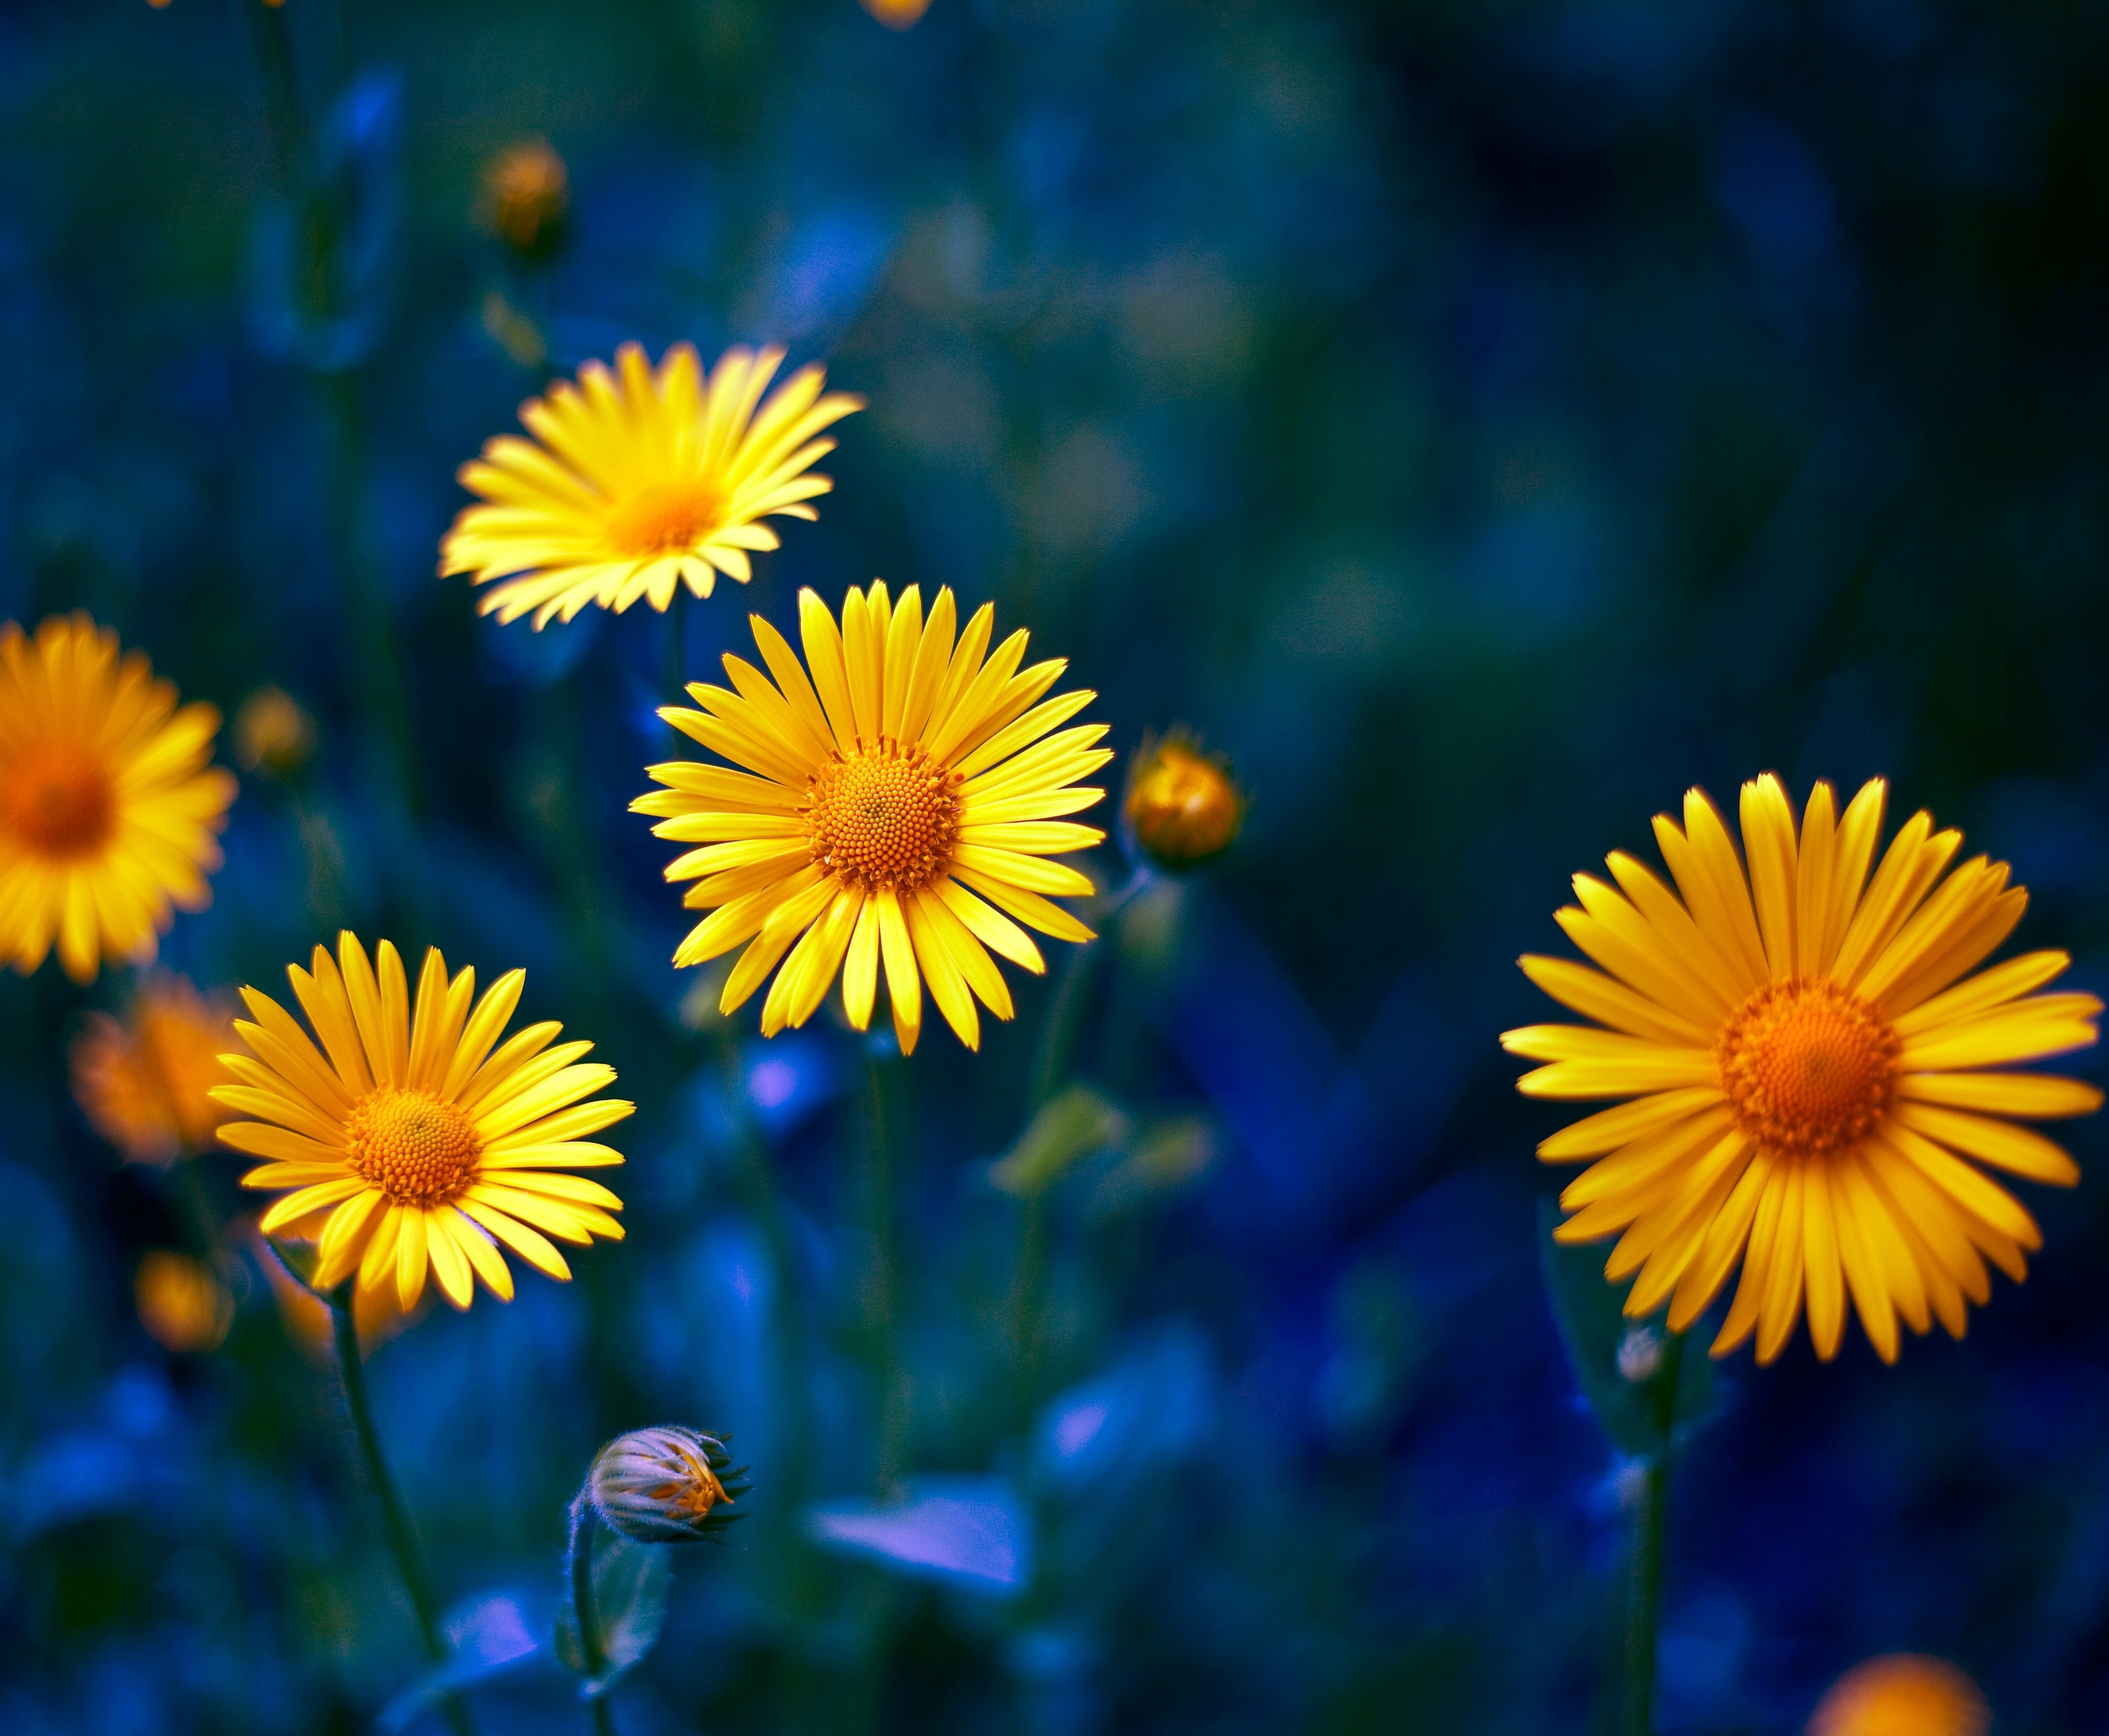 yellow flower, earth, flower, camomile, nature, flowers